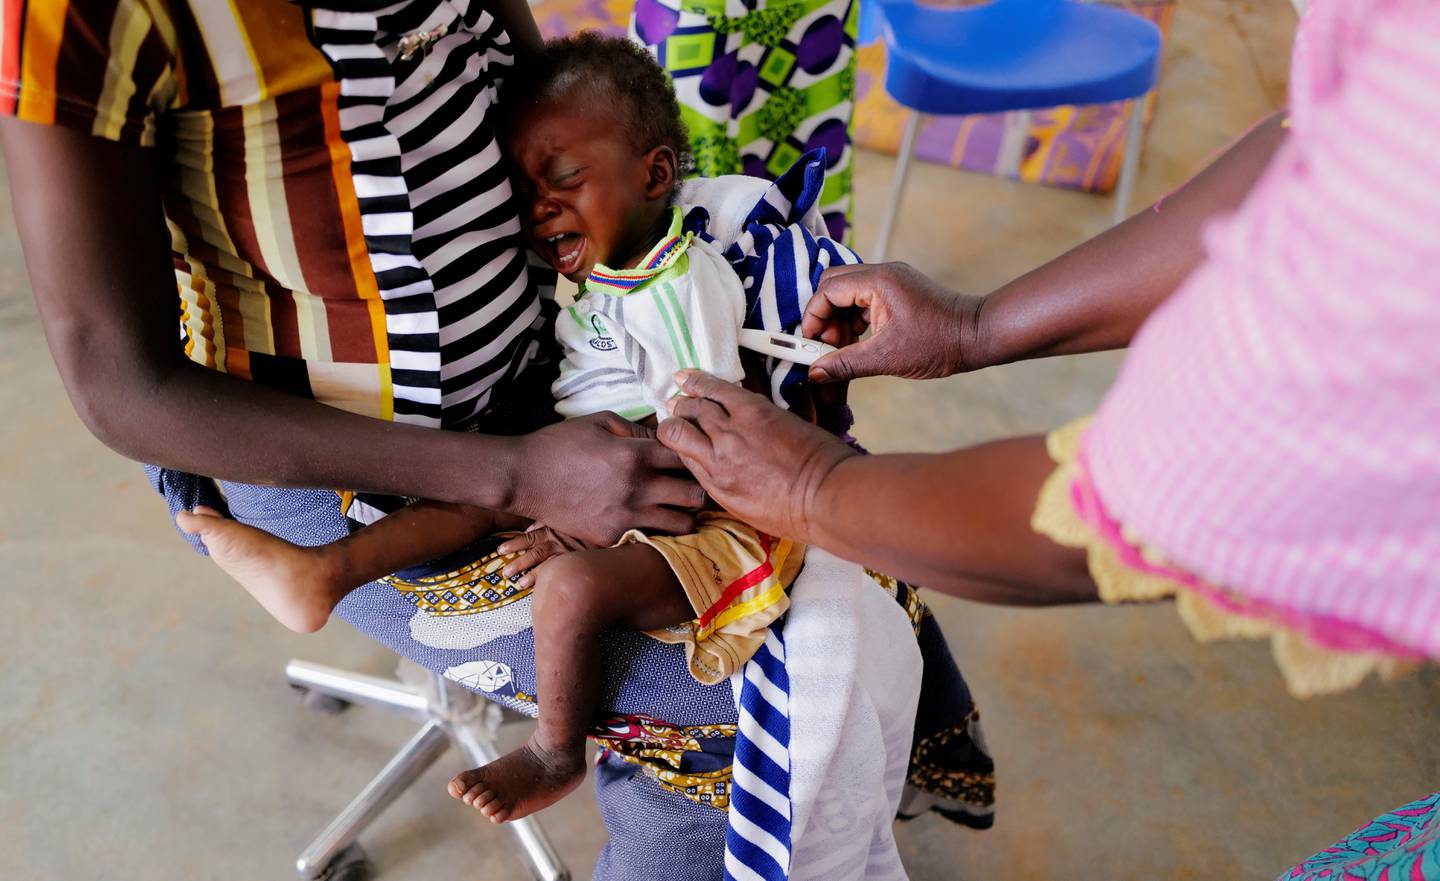 Hassan, a sixteen-month-old child who suffers from malnutrition, cries as a nurse checks his temperature at the hospital in Kaya, Burkina Faso November 23, 2020. Picture taken November 23, 2020.REUTERS/Zohra Bensemra